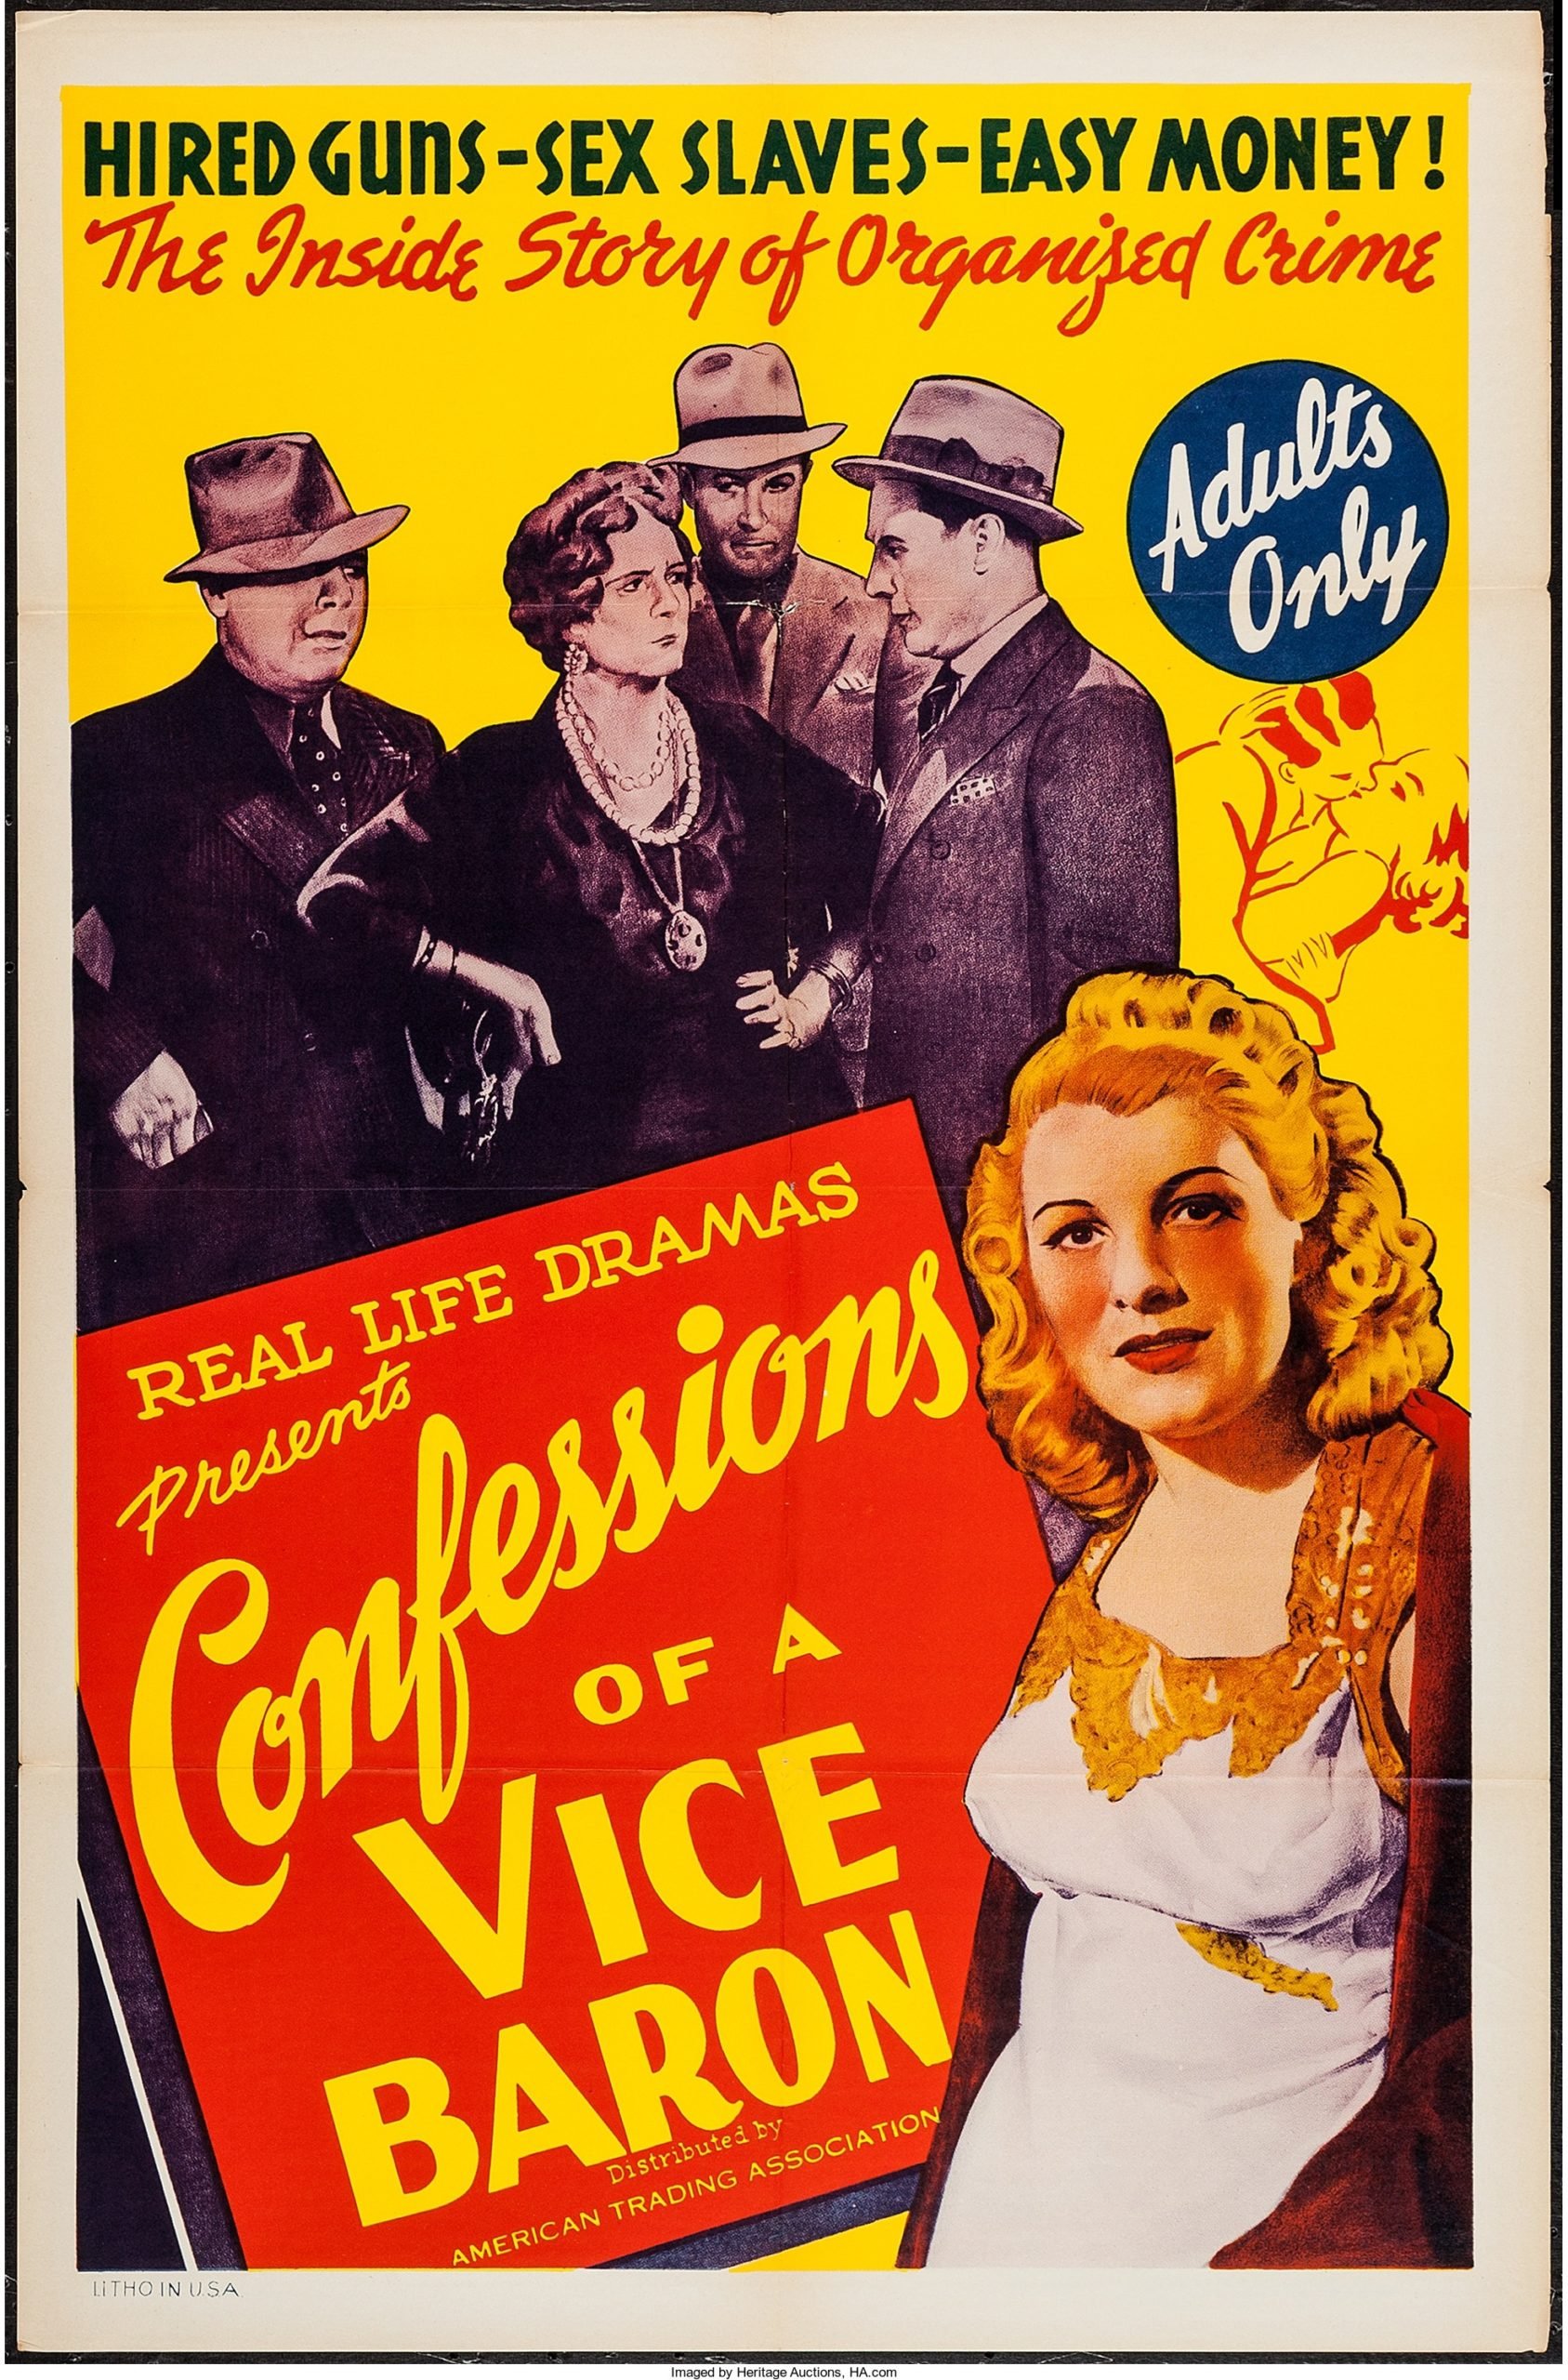 Original vintage US cinema movie poster for Confessions of a Vice Baron